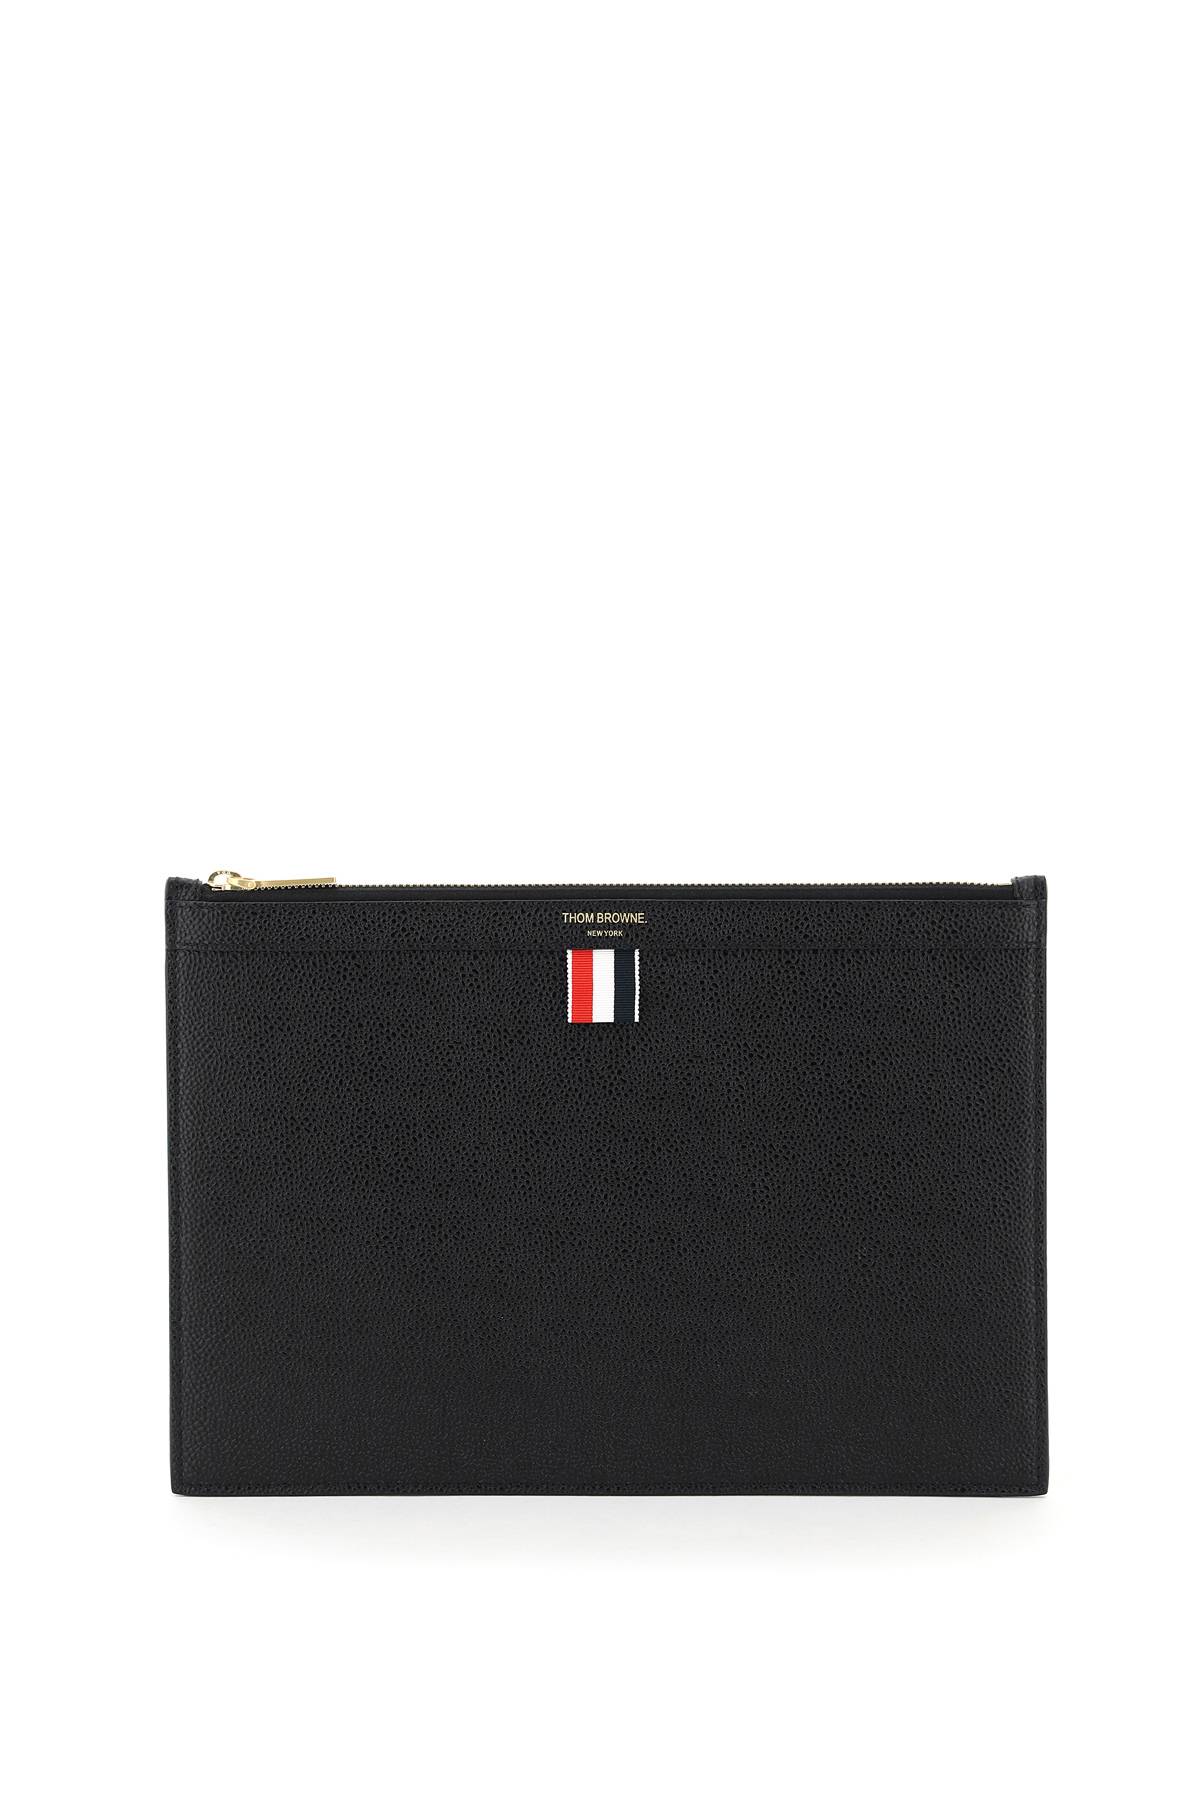 Thom Browne Leather Medium Document Holder Pouch In Black